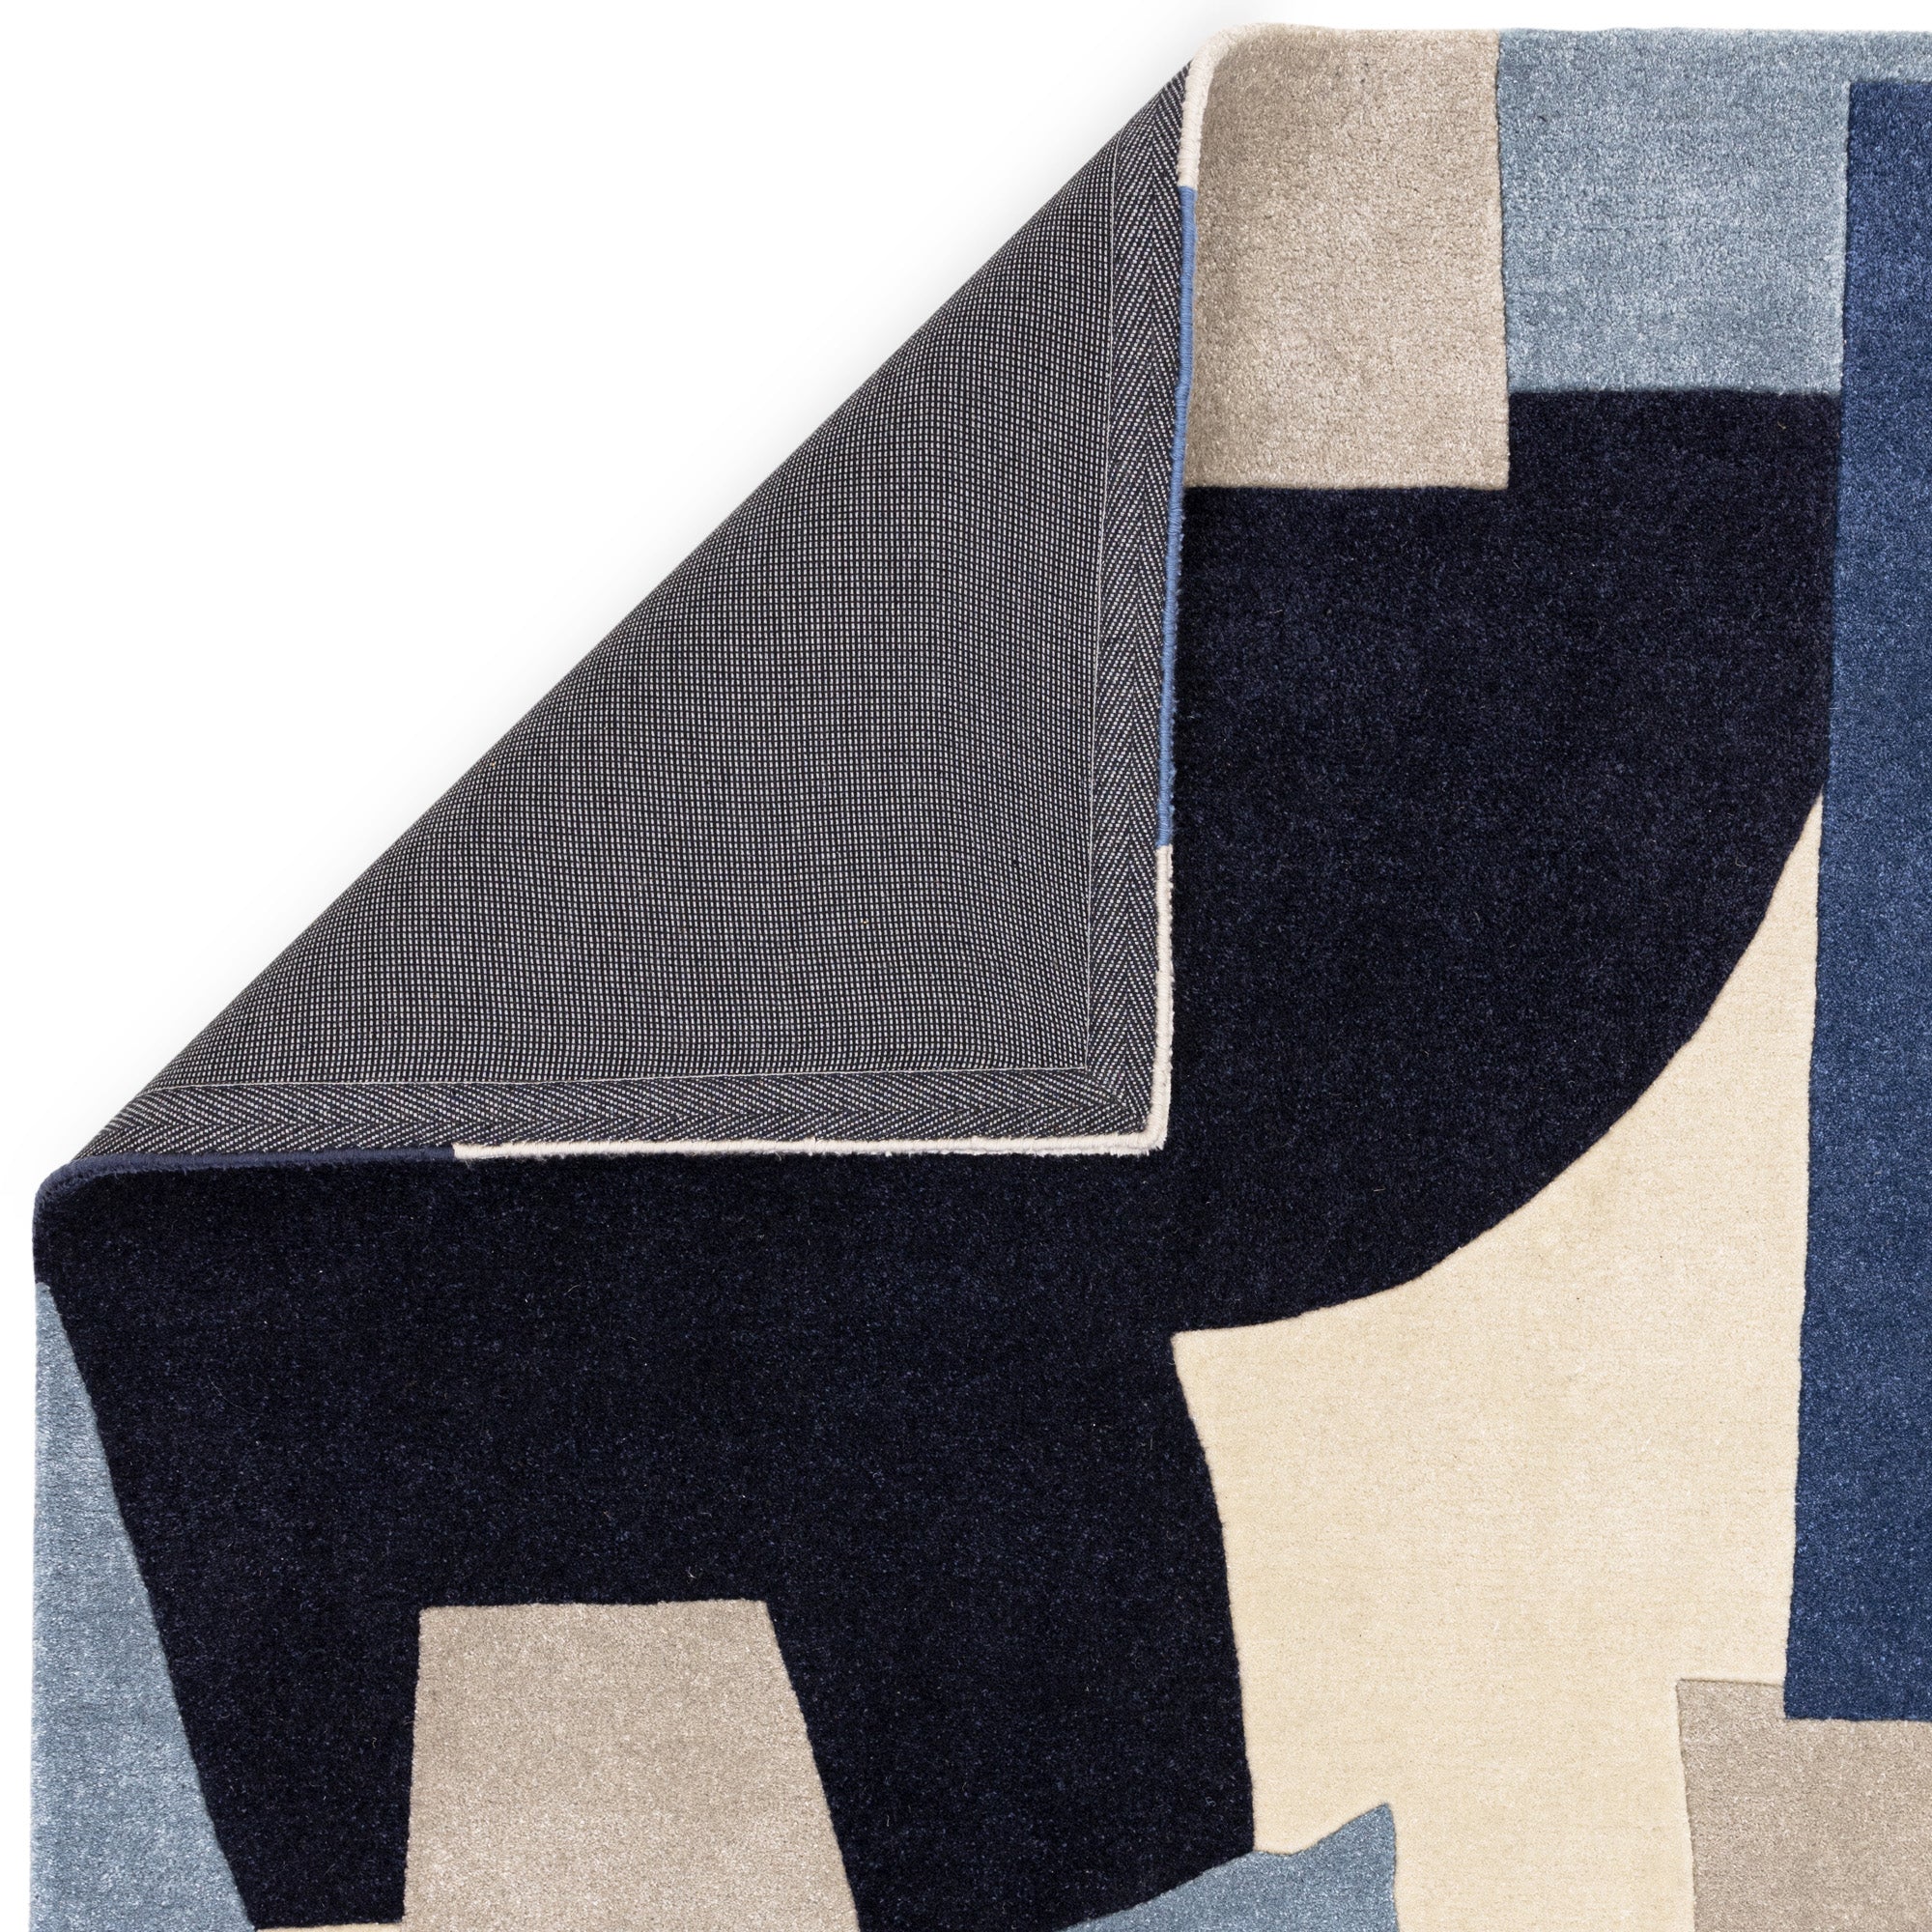 Multicolour rug with abstract pattern in blue, grey, and cream tones